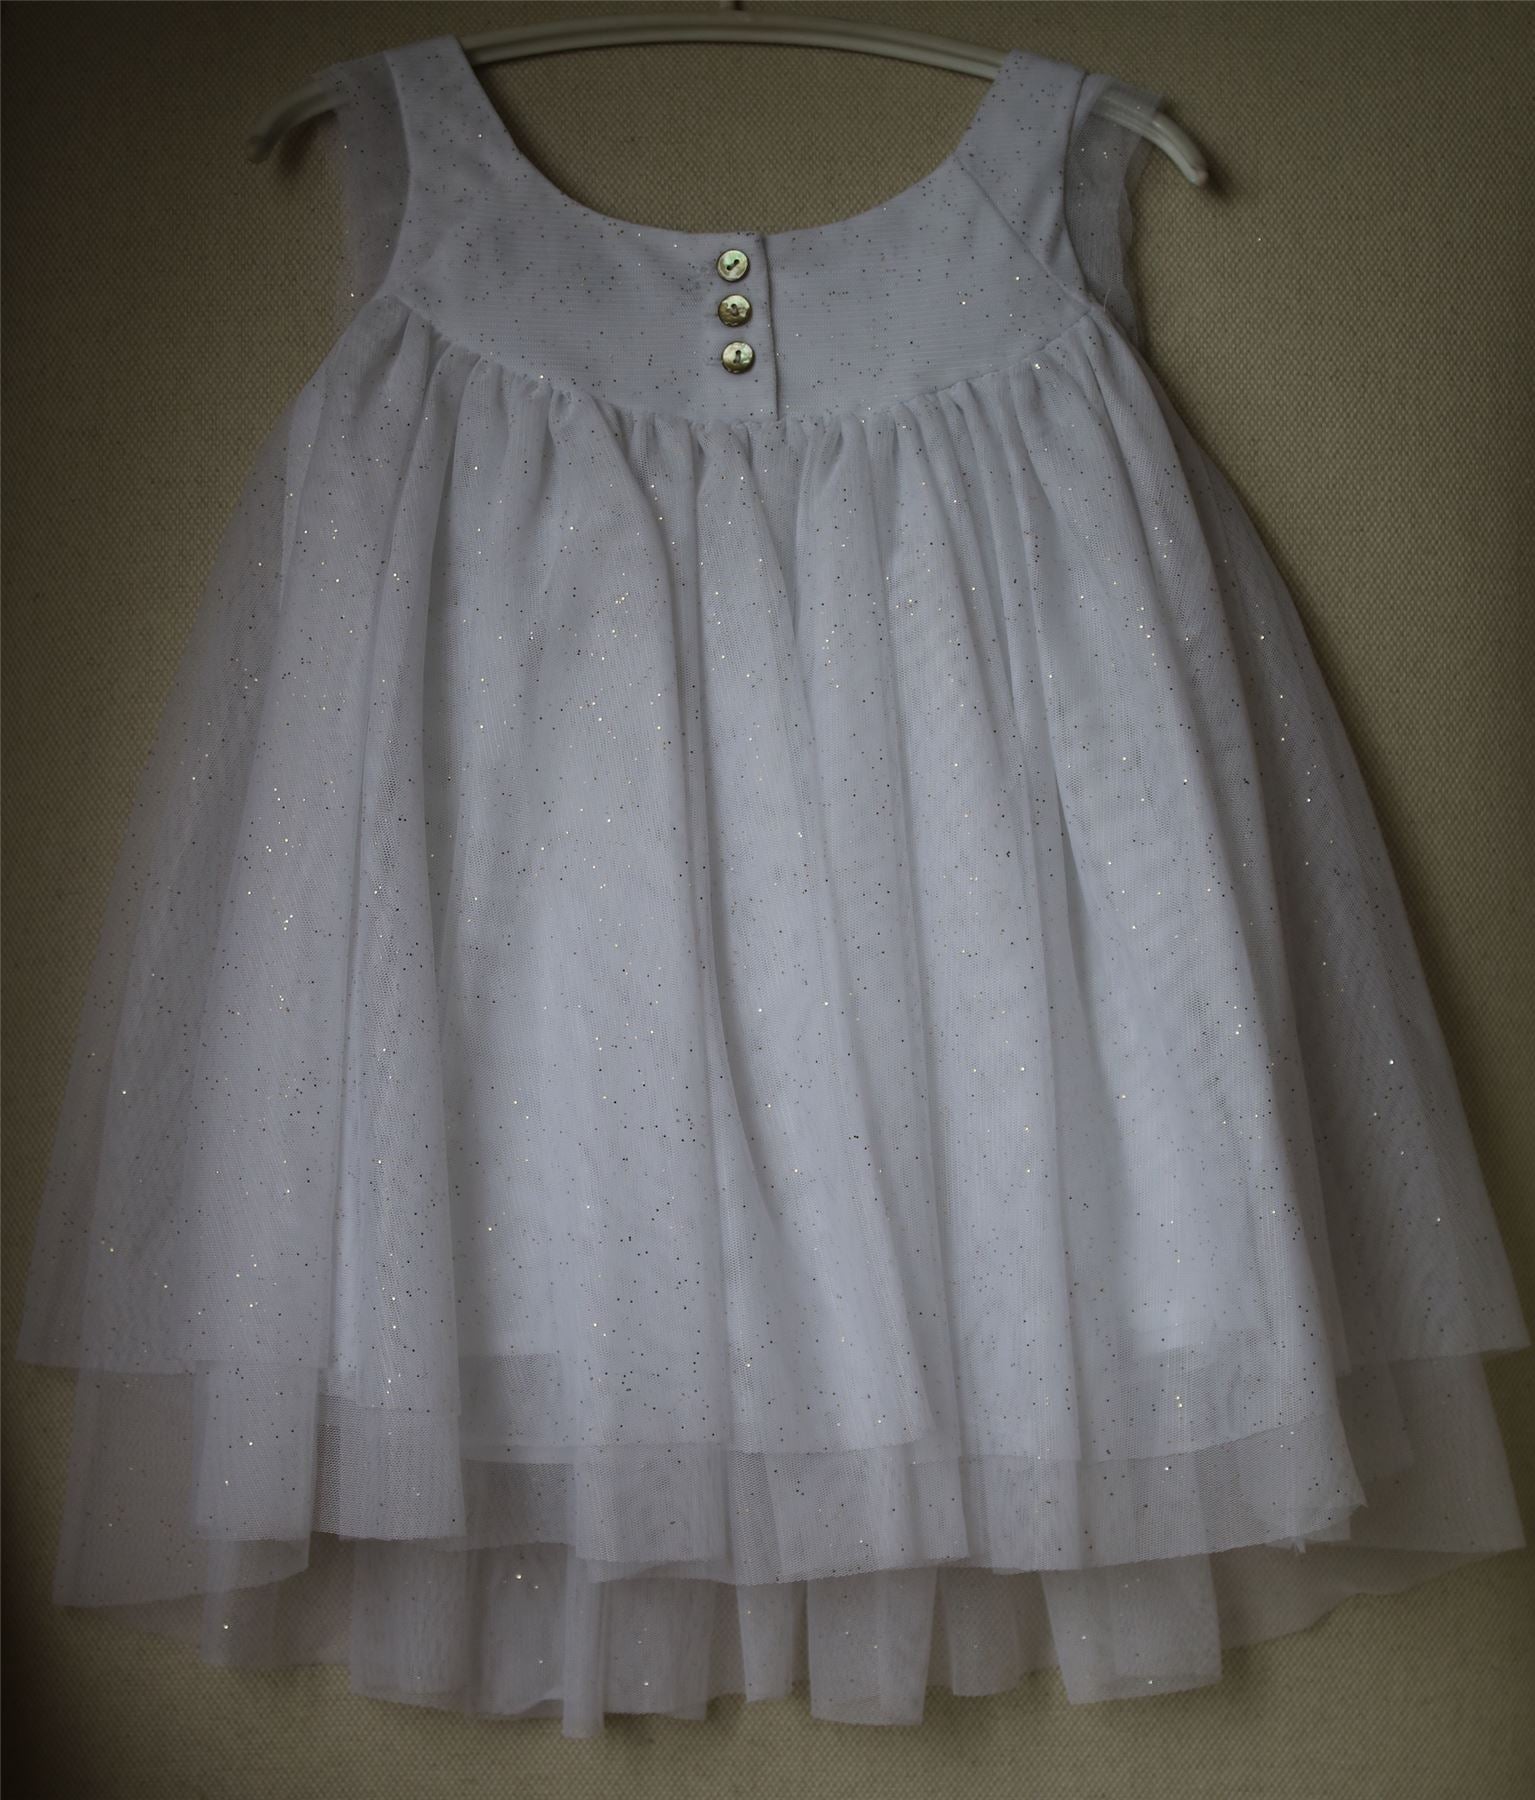 LILI GAUFRETTE GIRLS WHITE TULLE DRESS WITH GOLD GLITTER 2 YEARS